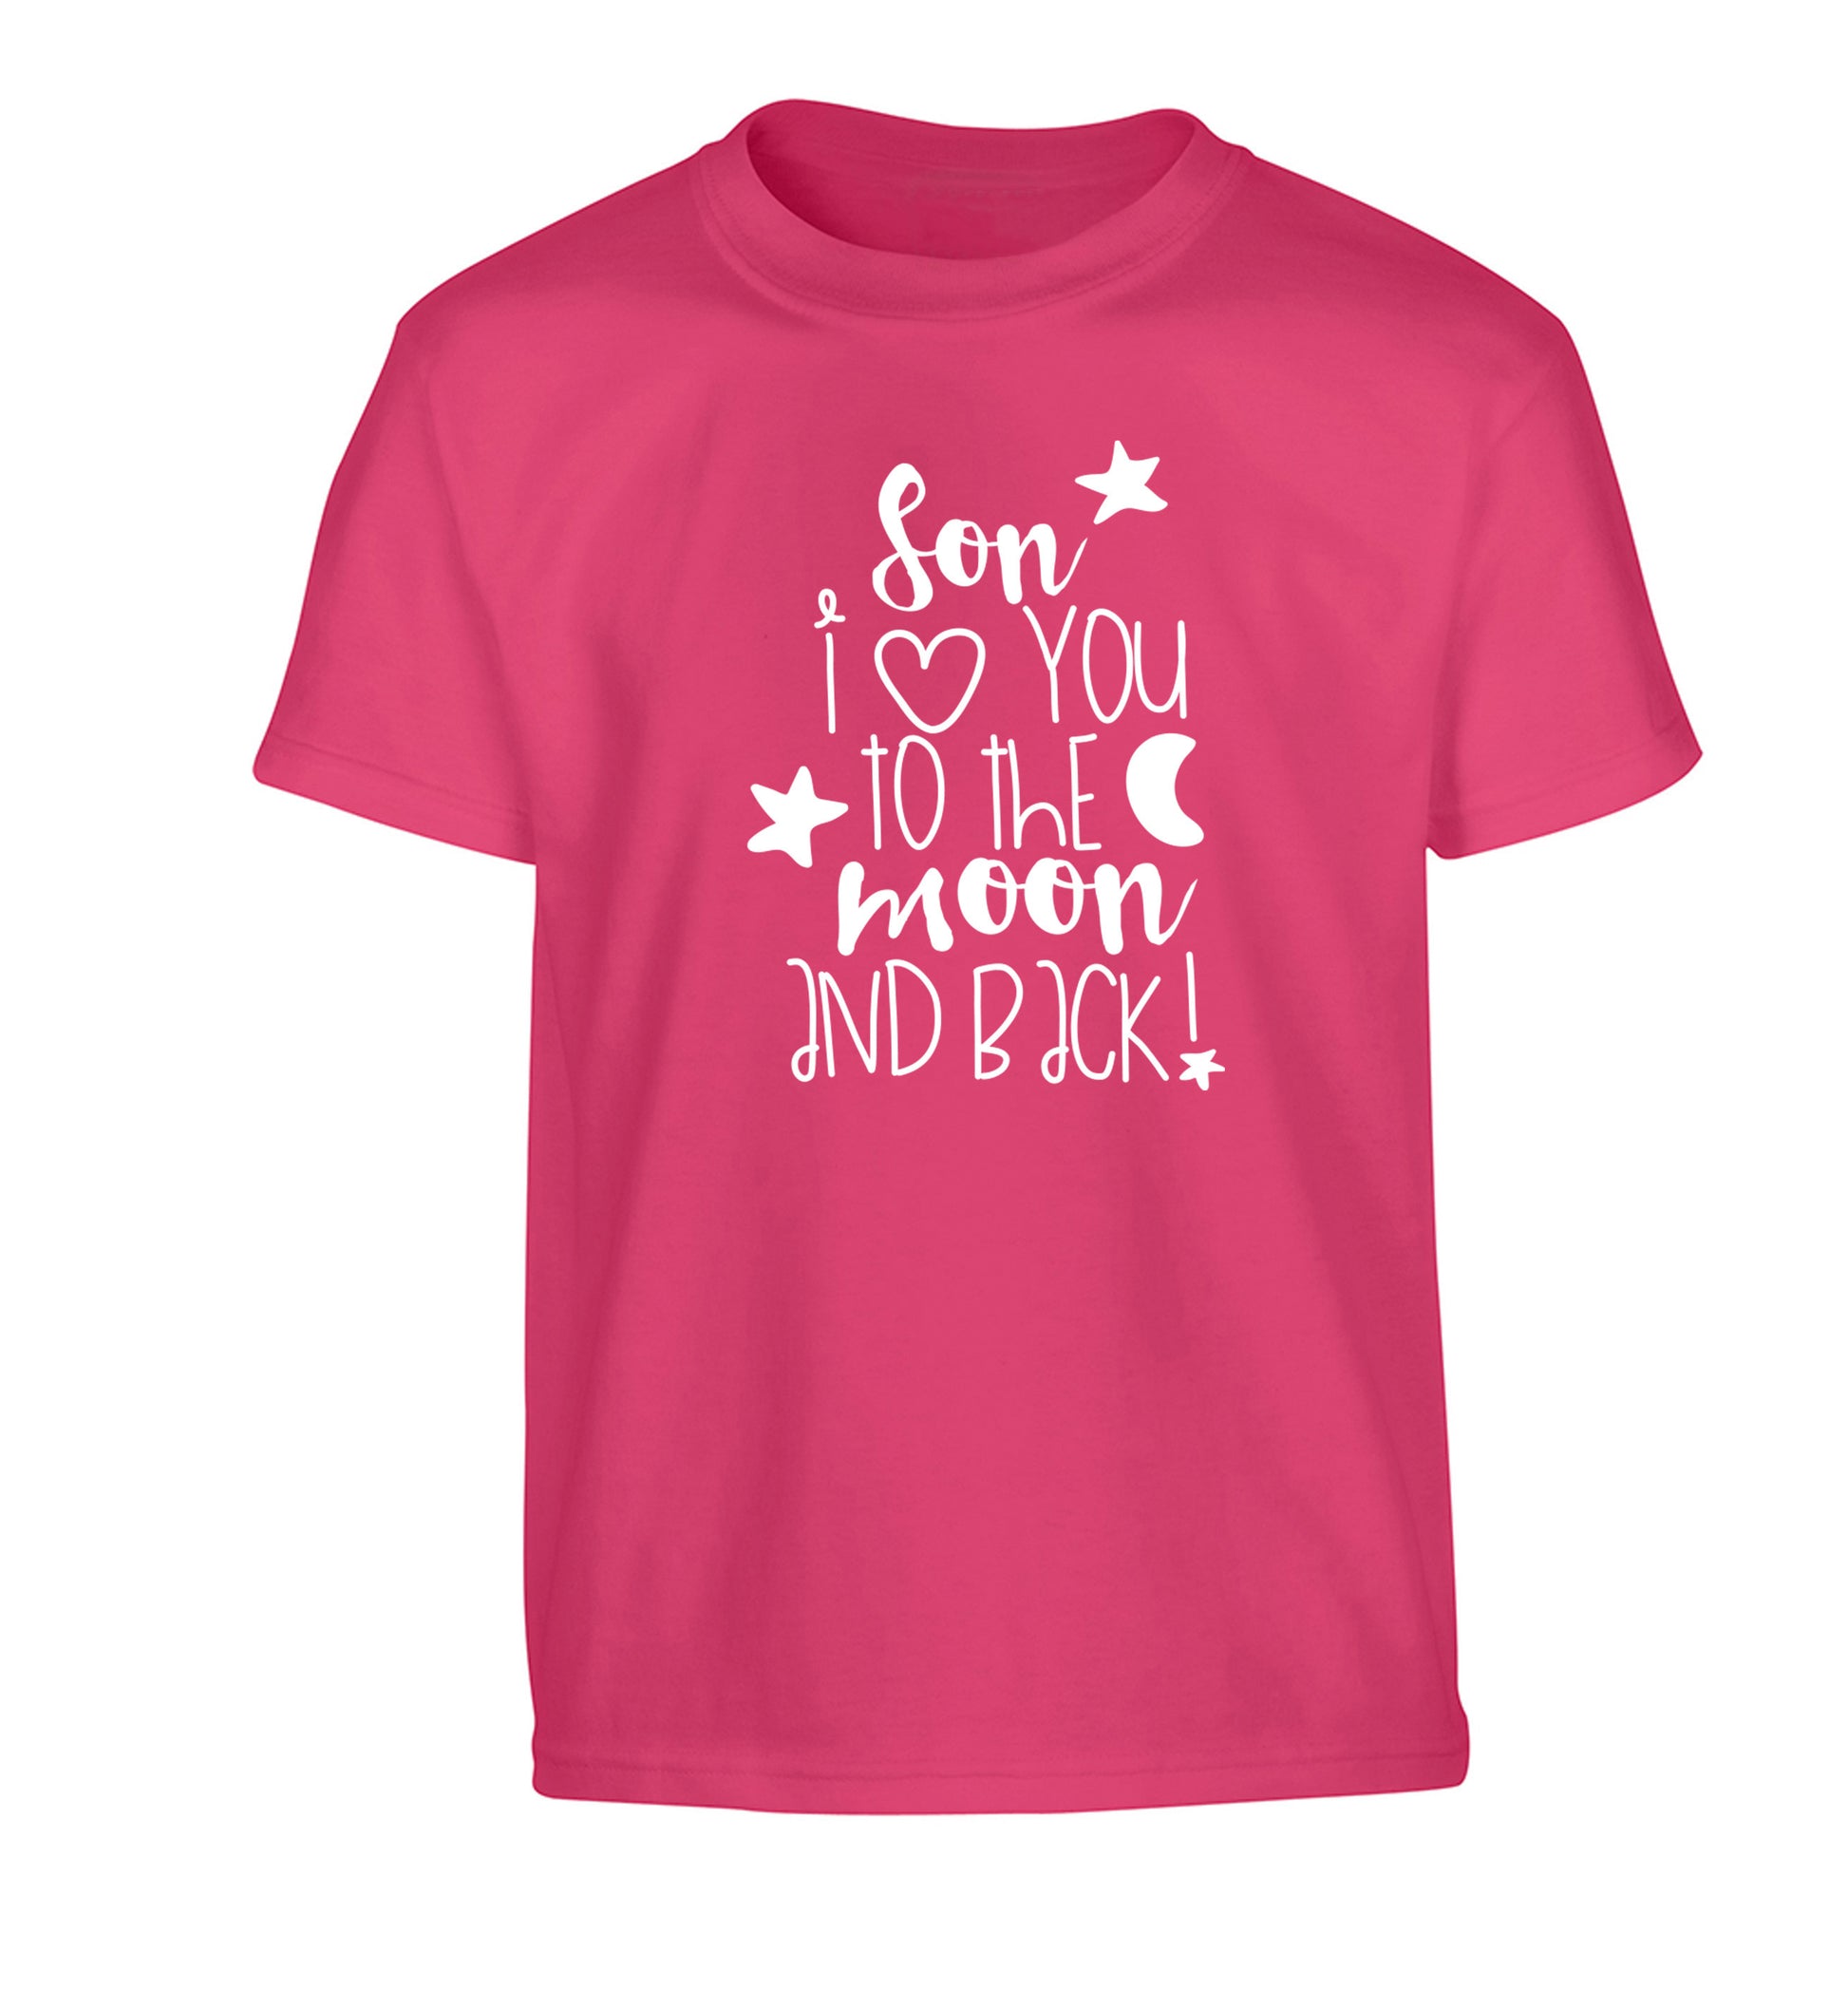 Son I love you to the moon and back Children's pink Tshirt 12-14 Years